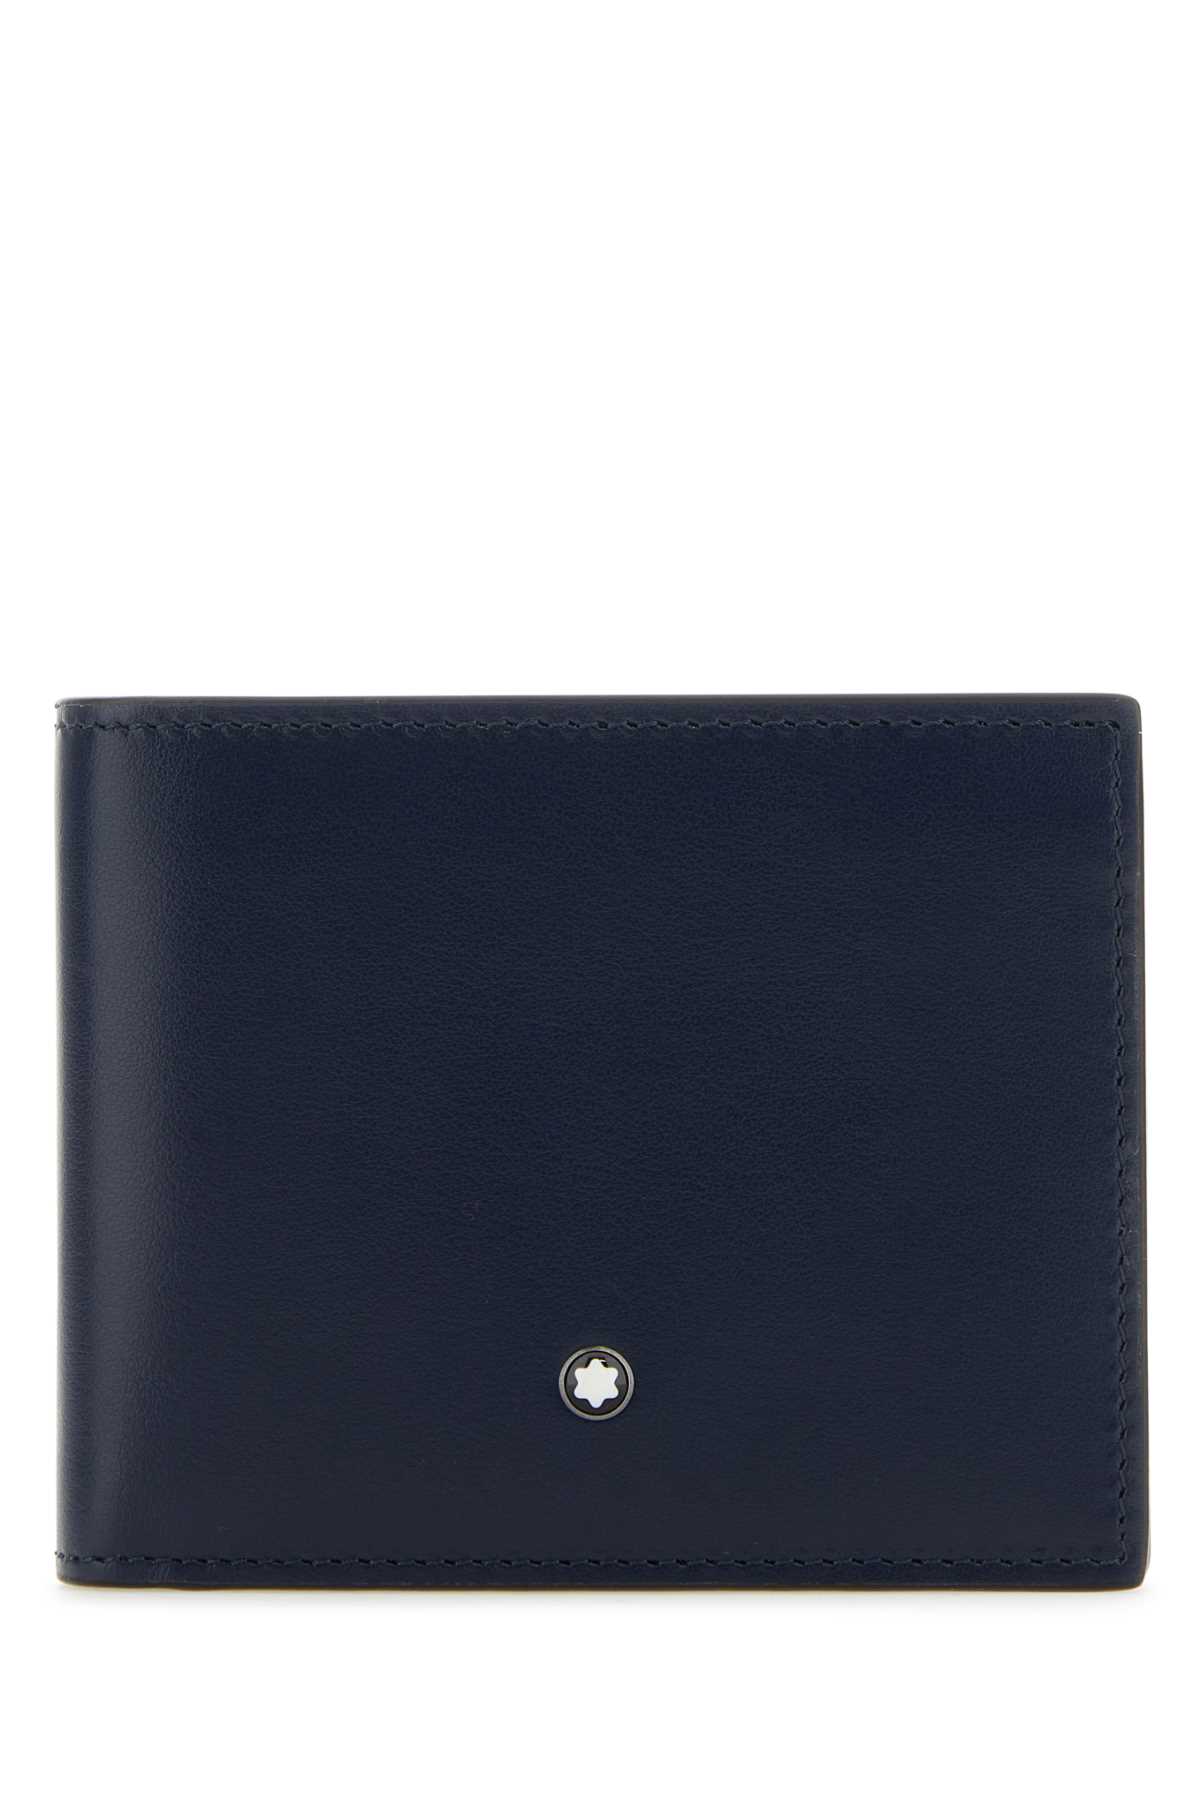 Navy Blue Leather Wallet